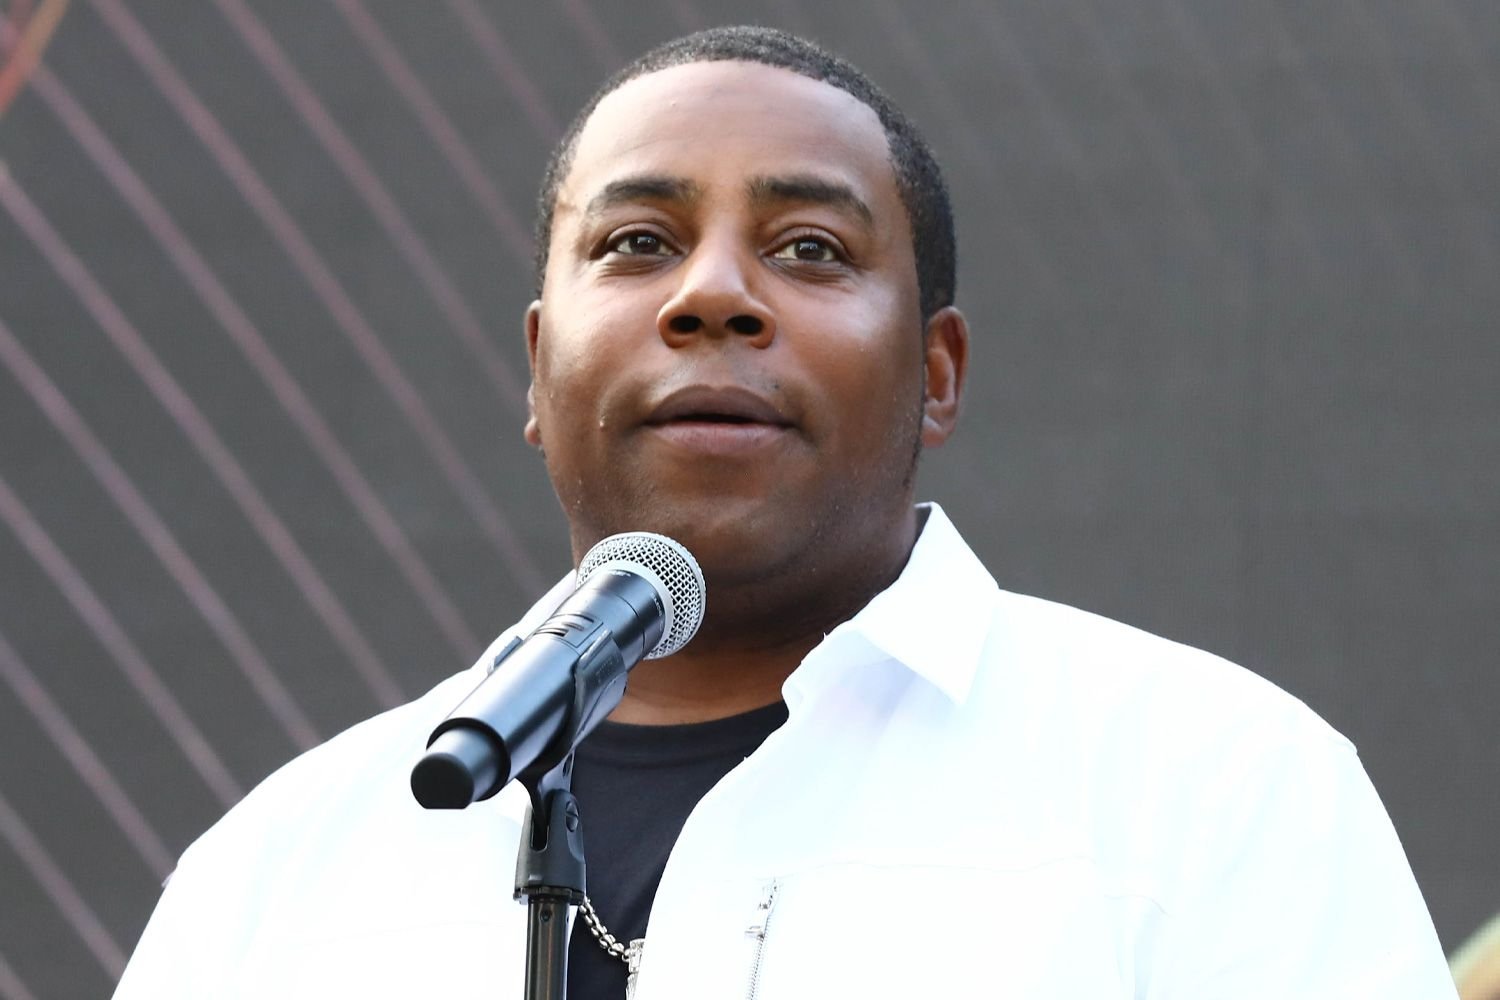 'All That' Alum Kenan Thompson Says 'Quiet on Set' Is 'Tough to Watch' and Urges Nickelodeon to 'Investigate More'